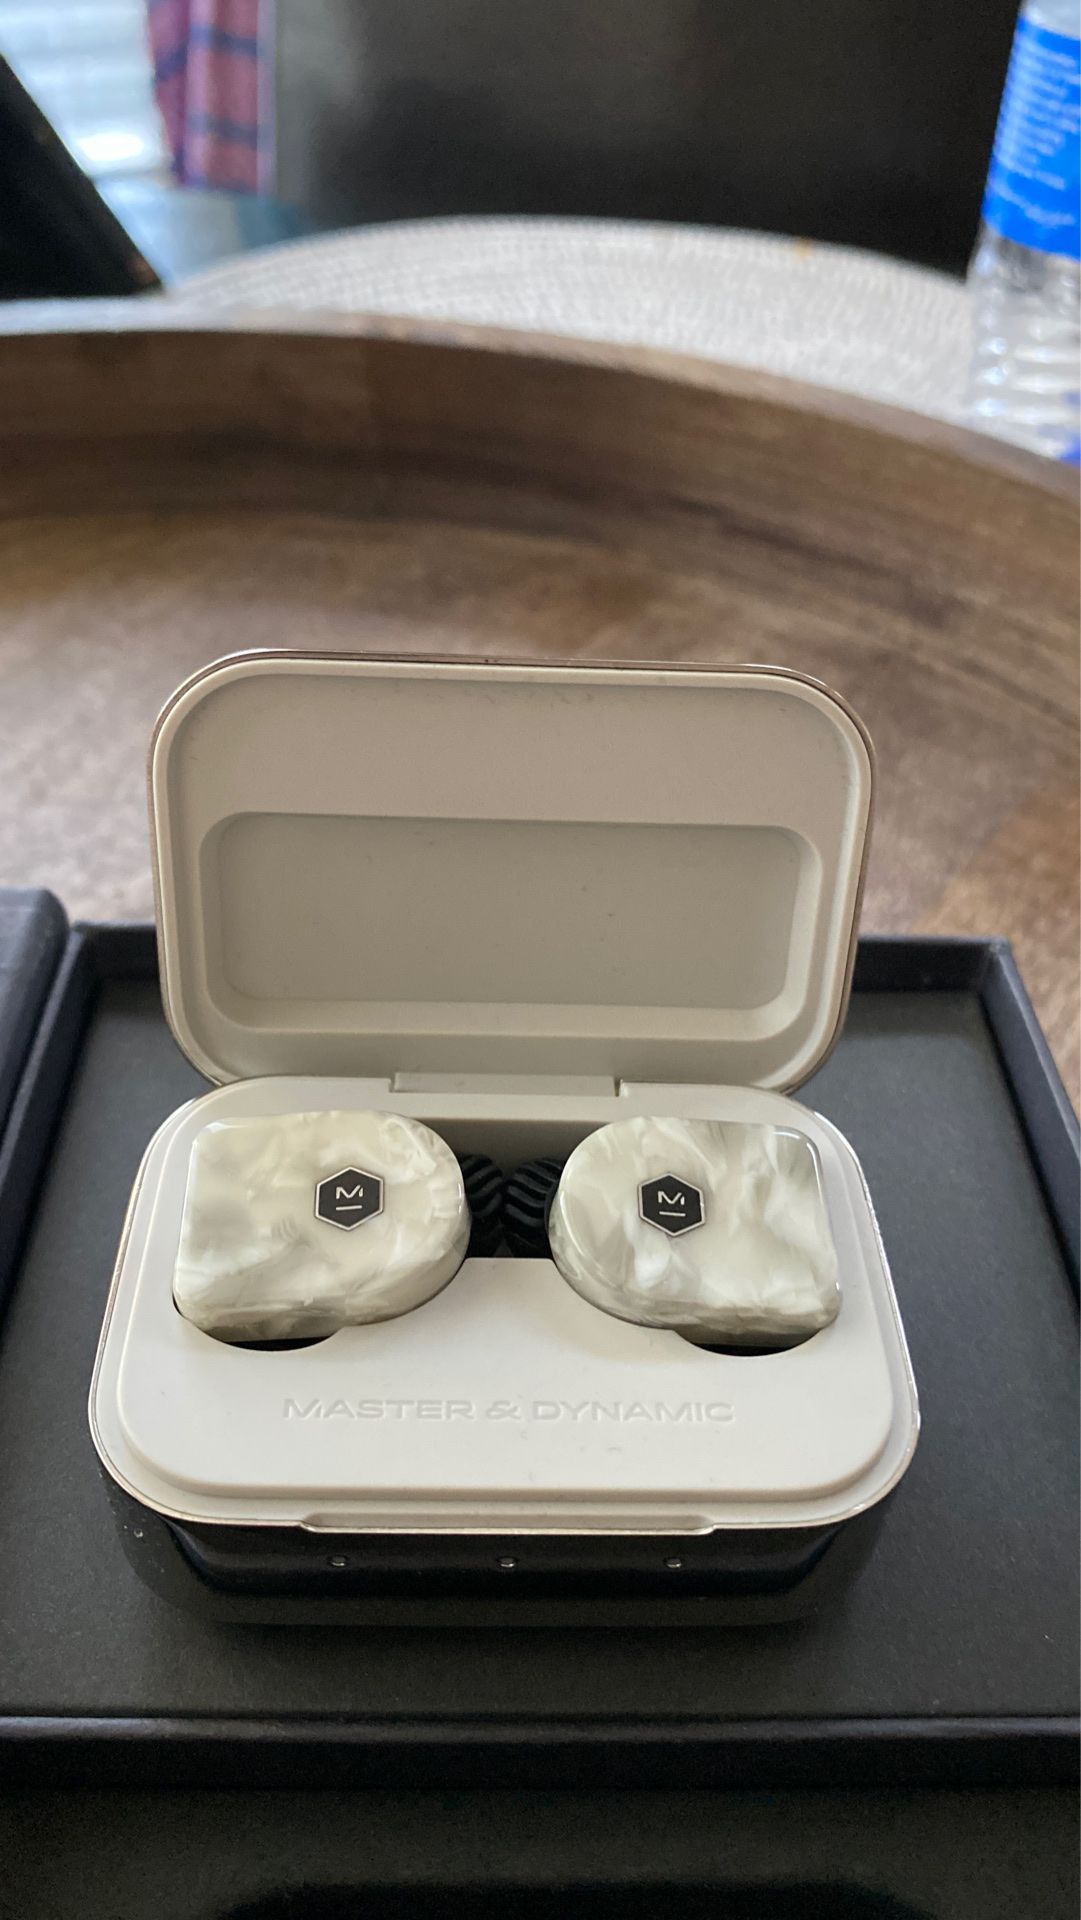 Master and Dynamic wireless anc earbuds MW07